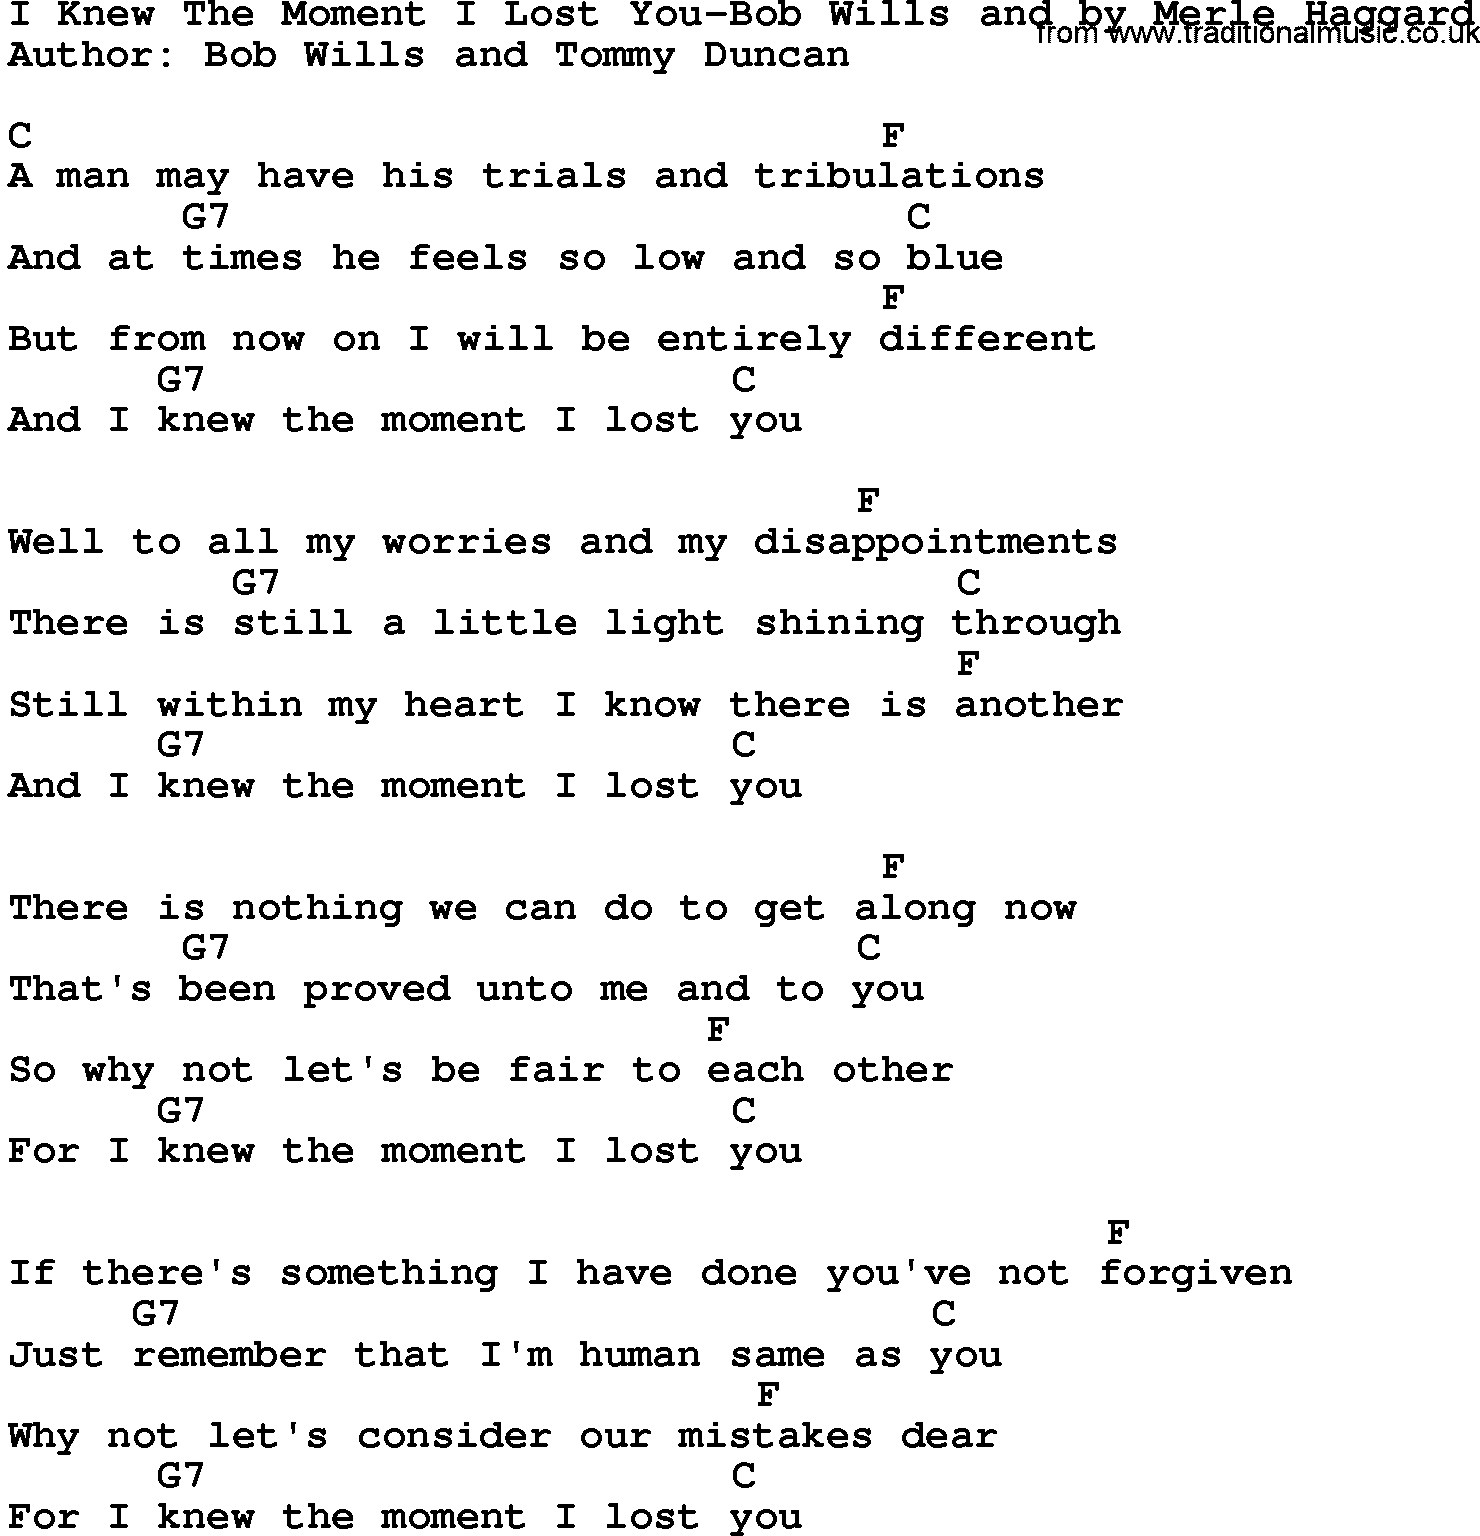 Country music song: I Knew The Moment I Lost You-Bob Wills And By Merle Haggard lyrics and chords